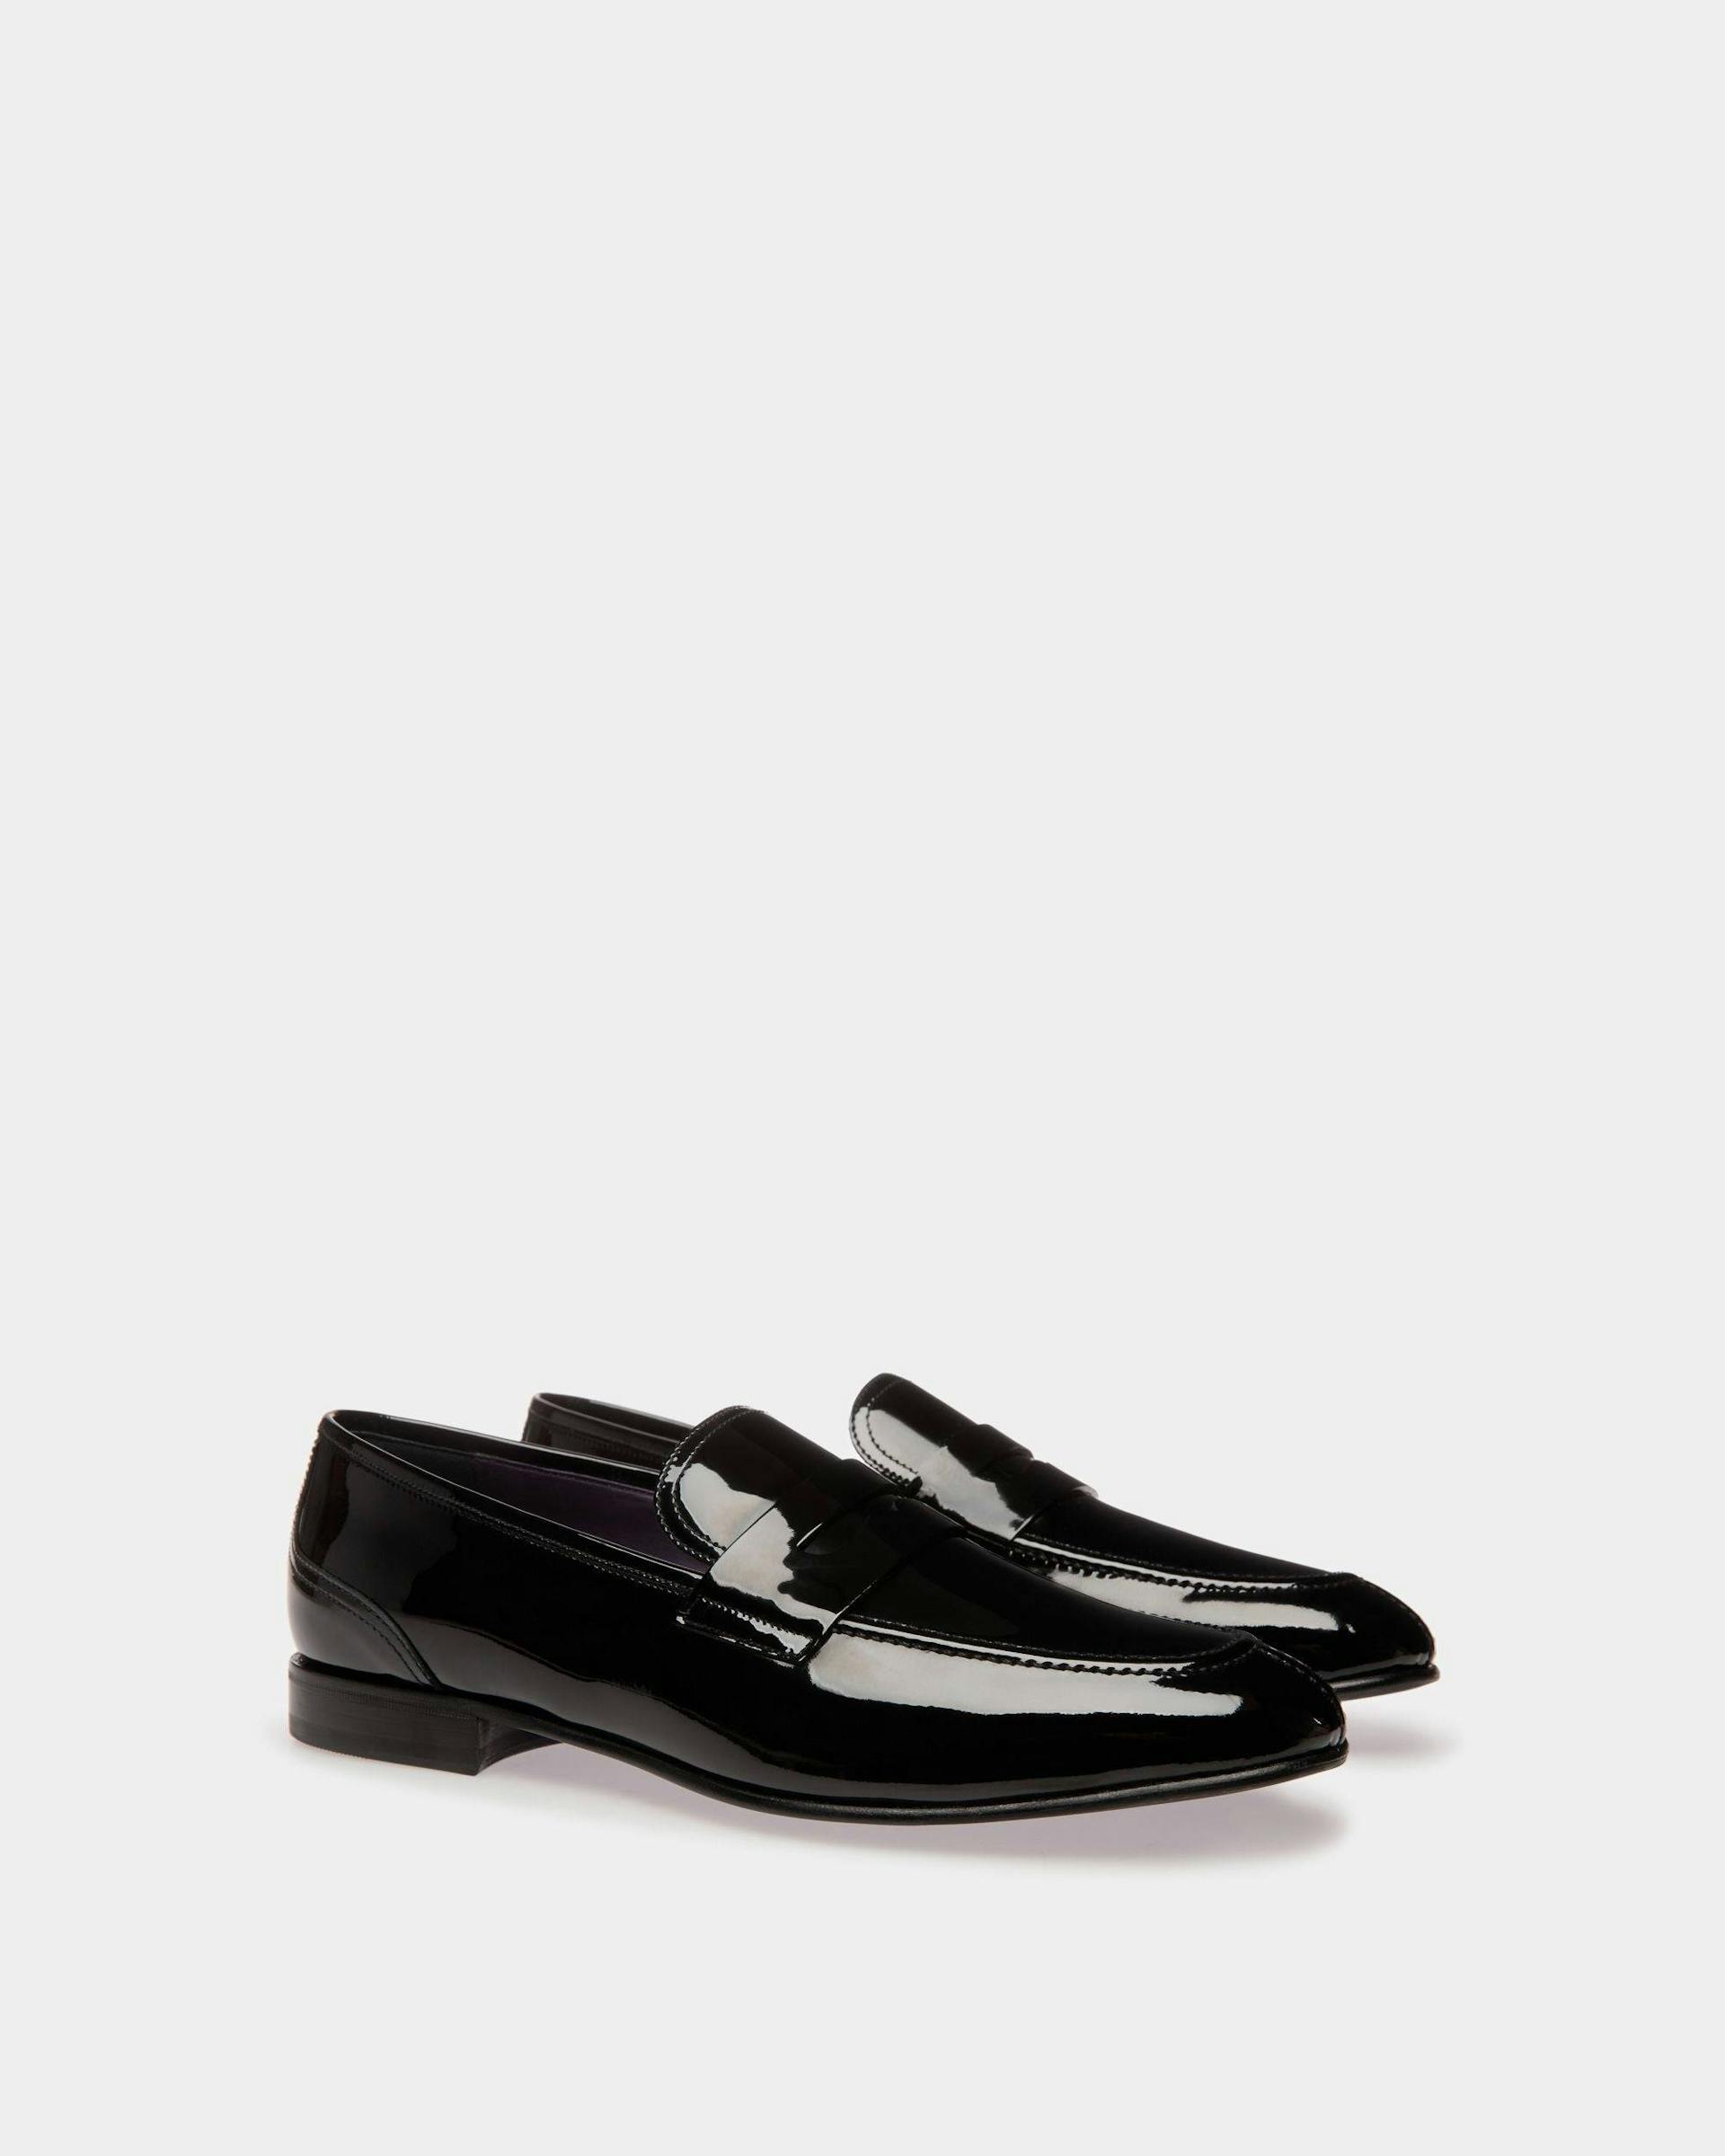 Suisse Loafer in Black Patent Leather - Men's - Bally - 02